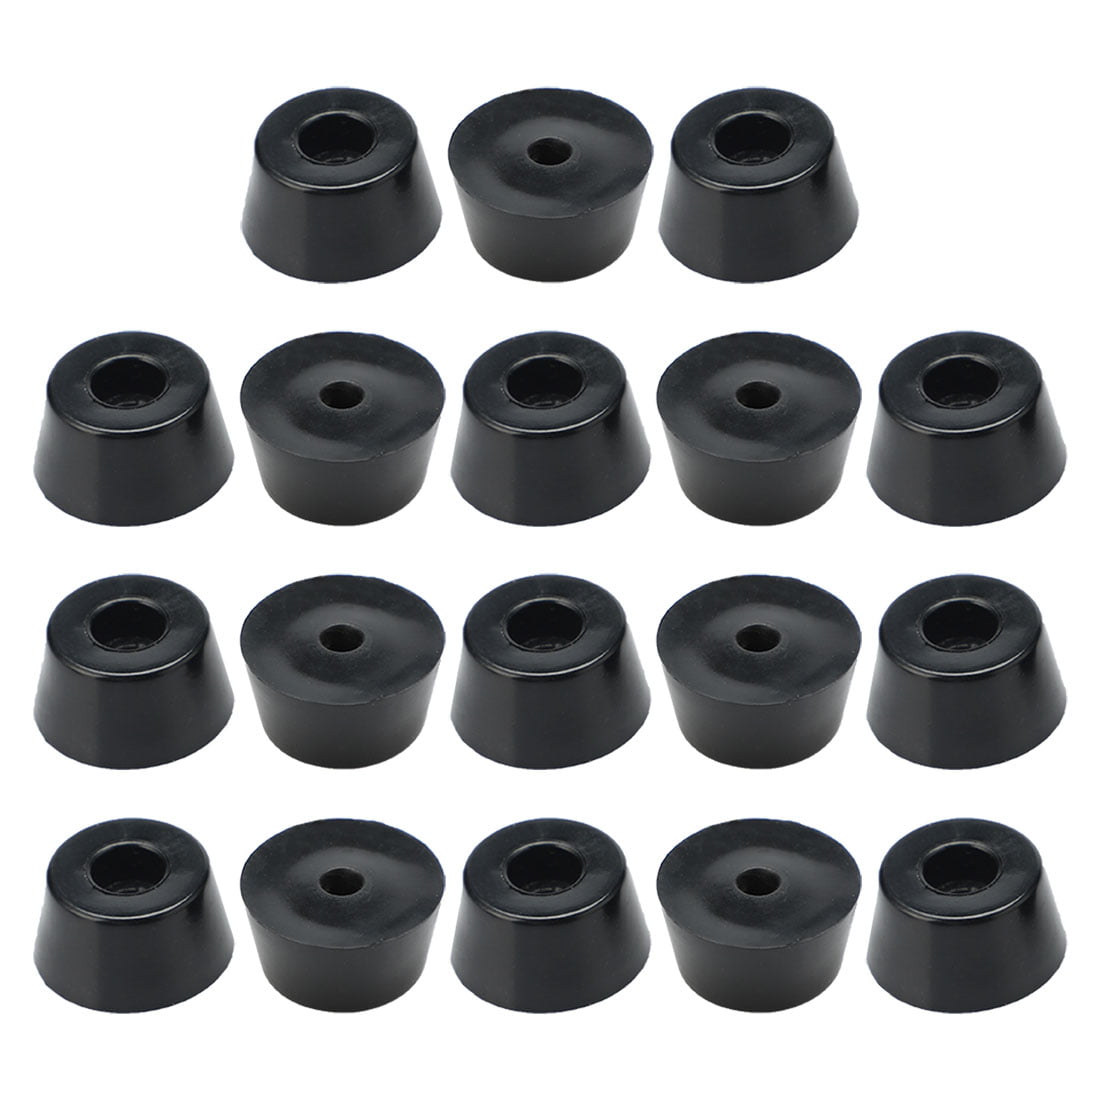 Furniture feet. 8 Small Round Rubber Feet Bumper with Screws for Cutting board 